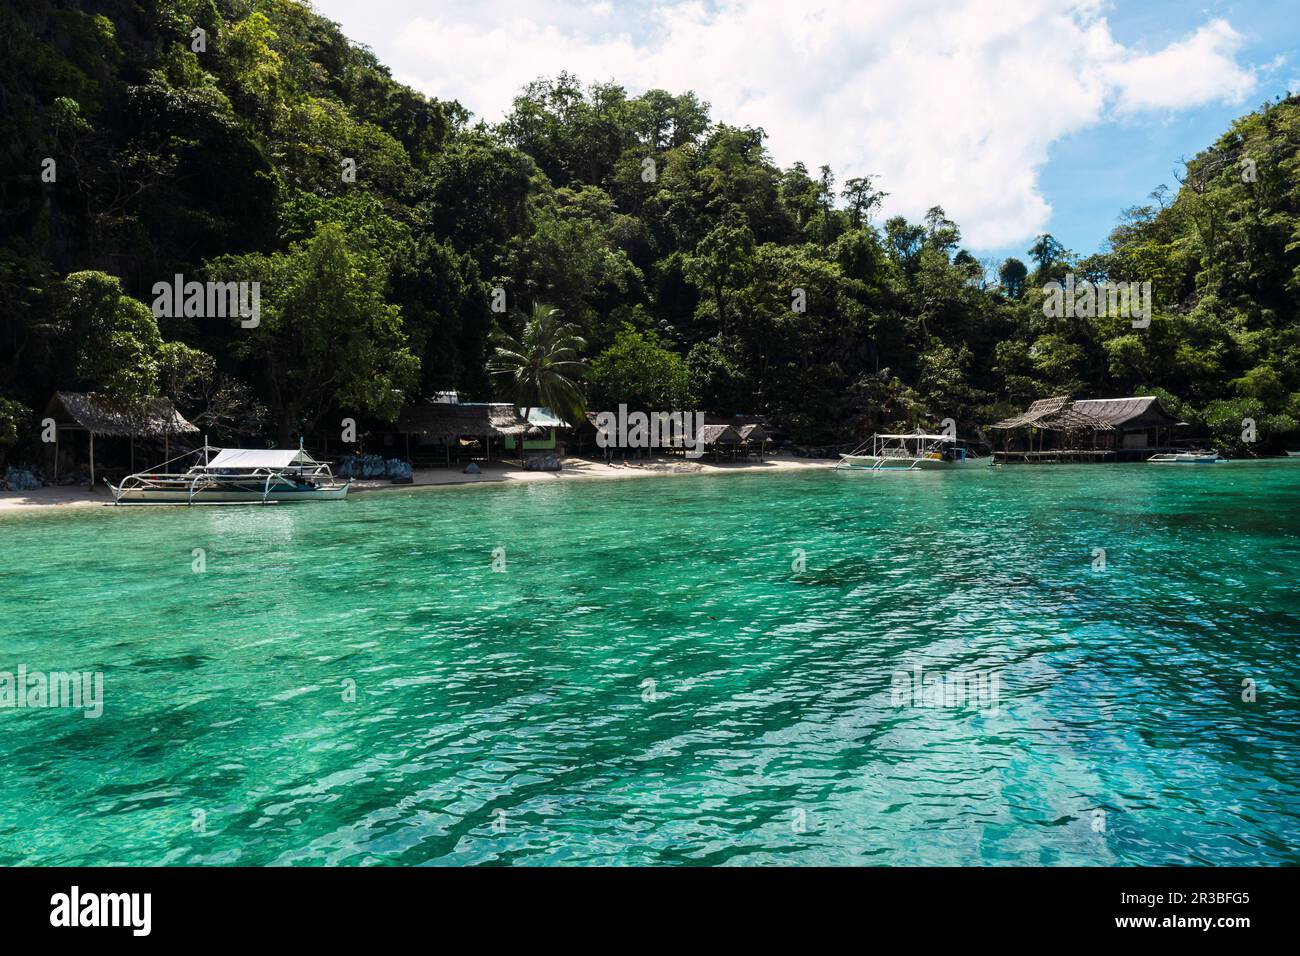 Sea with huts and trees at Coron Island in Philippines Stock Photo